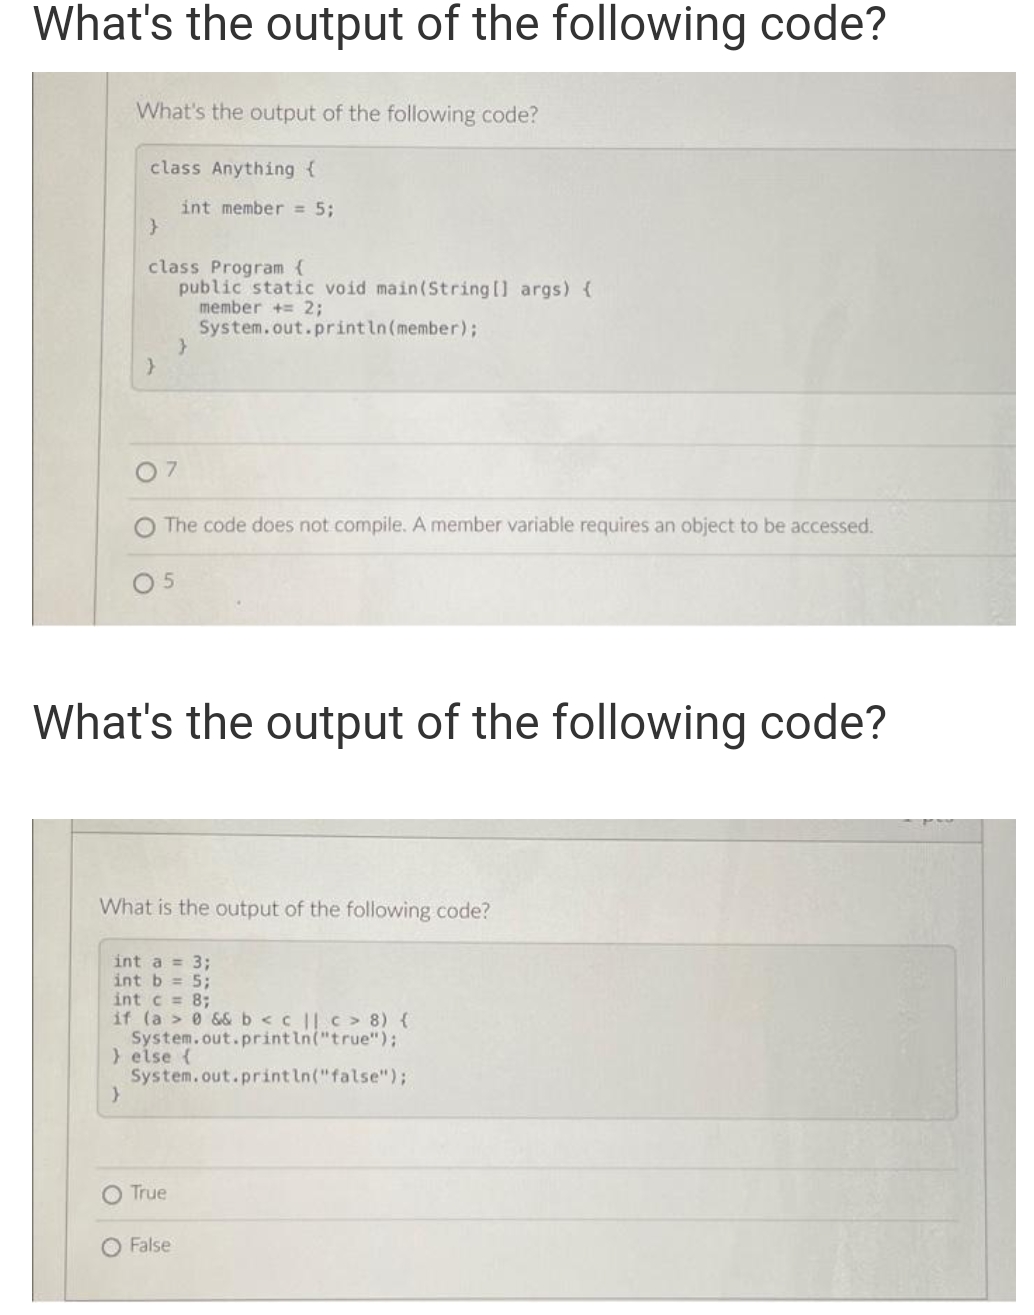 What's the output of the following code?
What's the output of the following code?
class Anything {
}
class Program {
public static void main(String[] args) {
member += 2;
System.out.println (member);
}
07
5
int member = 5;
The code does not compile. A member variable requires an object to be accessed.
}
What's the output of the following code?
What is the output of the following code?
O True
int a = 3;
int b = 5;
int c = 8;
if (a> 0 && b < c || c> 8) {
System.out.println("true");
} else {
System.out.println("false");
}
O False